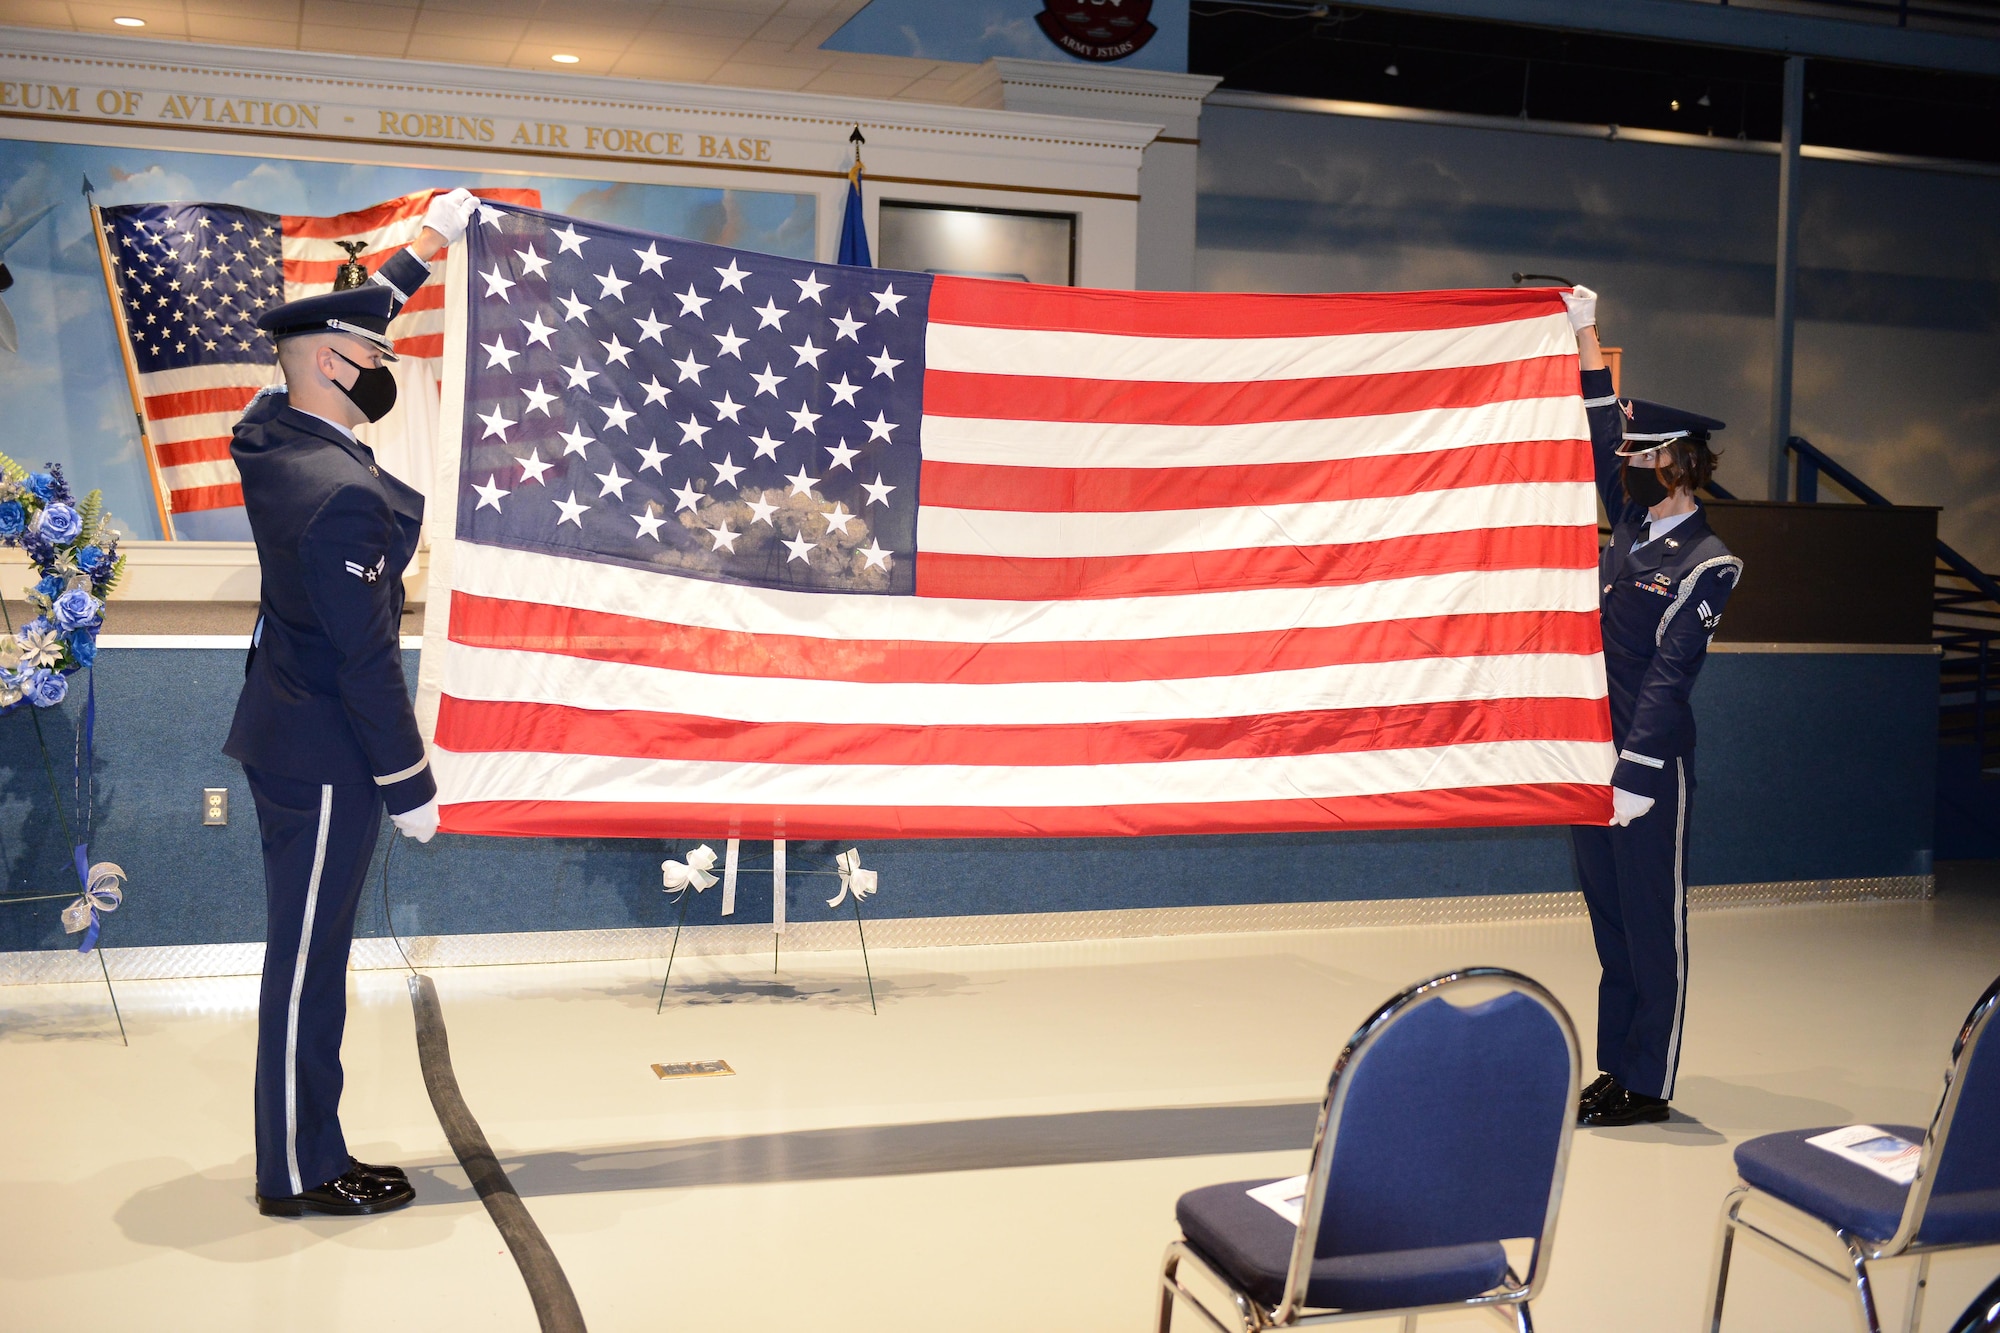 Photo shows two people holding unfurled flag up.